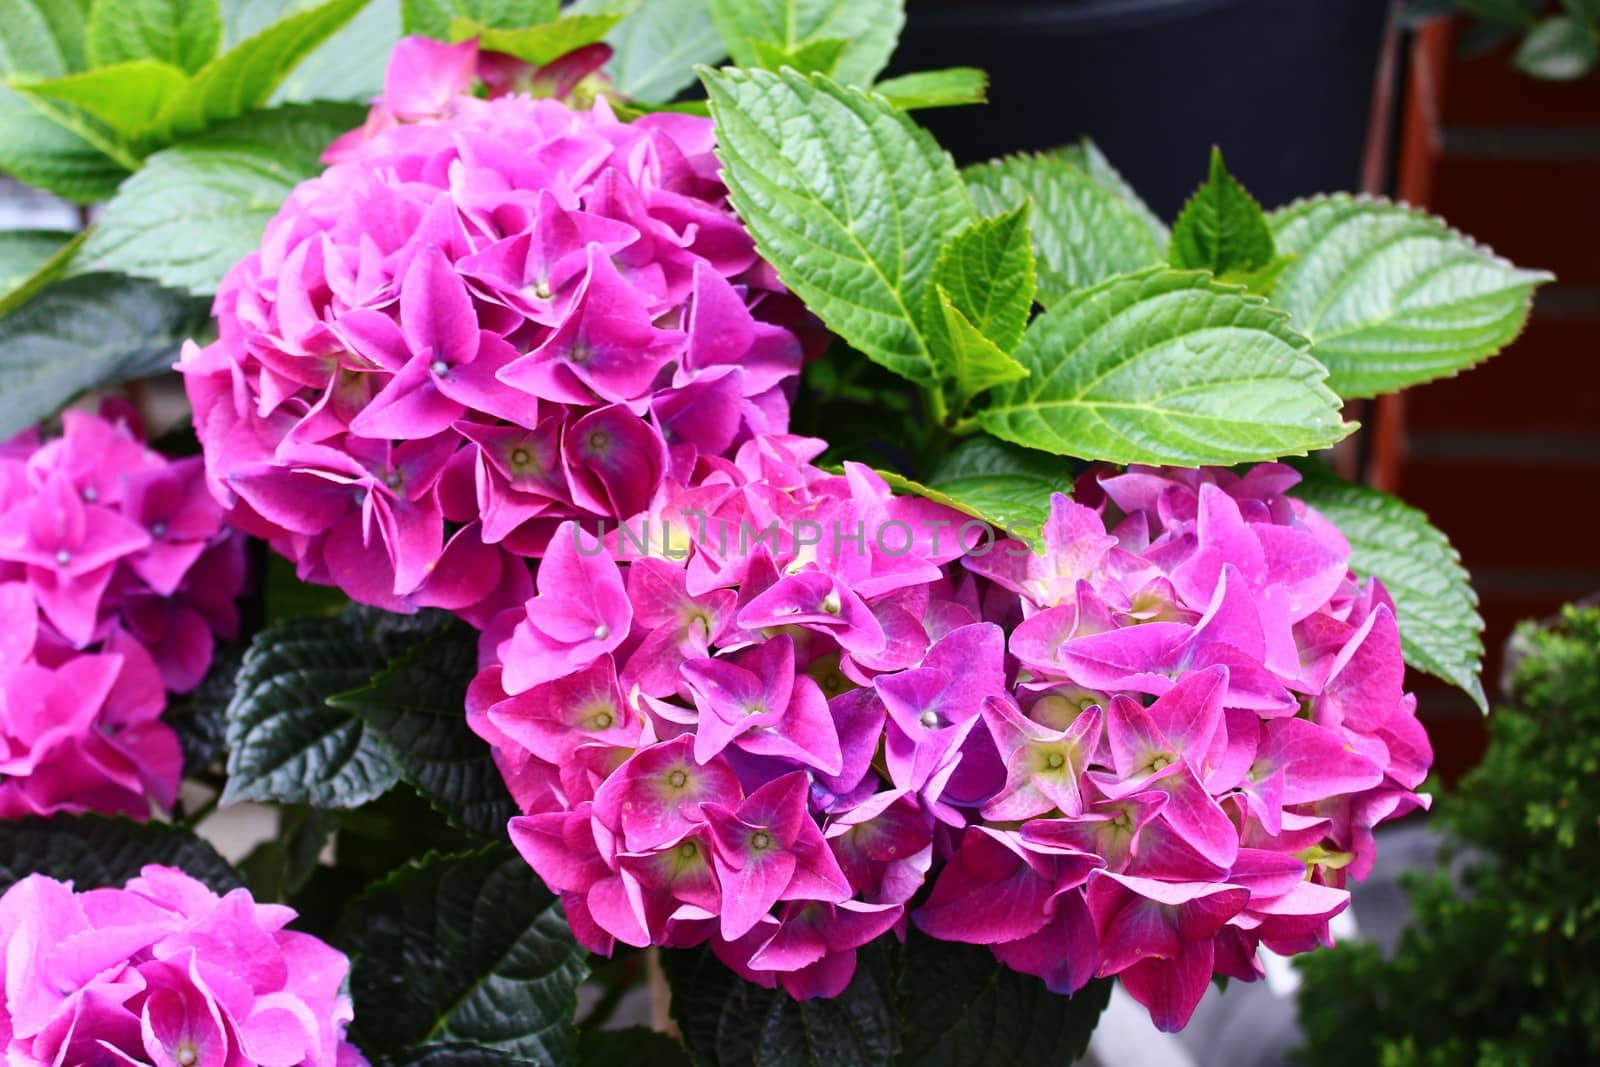 The picture shows pink hydrangea in the garden